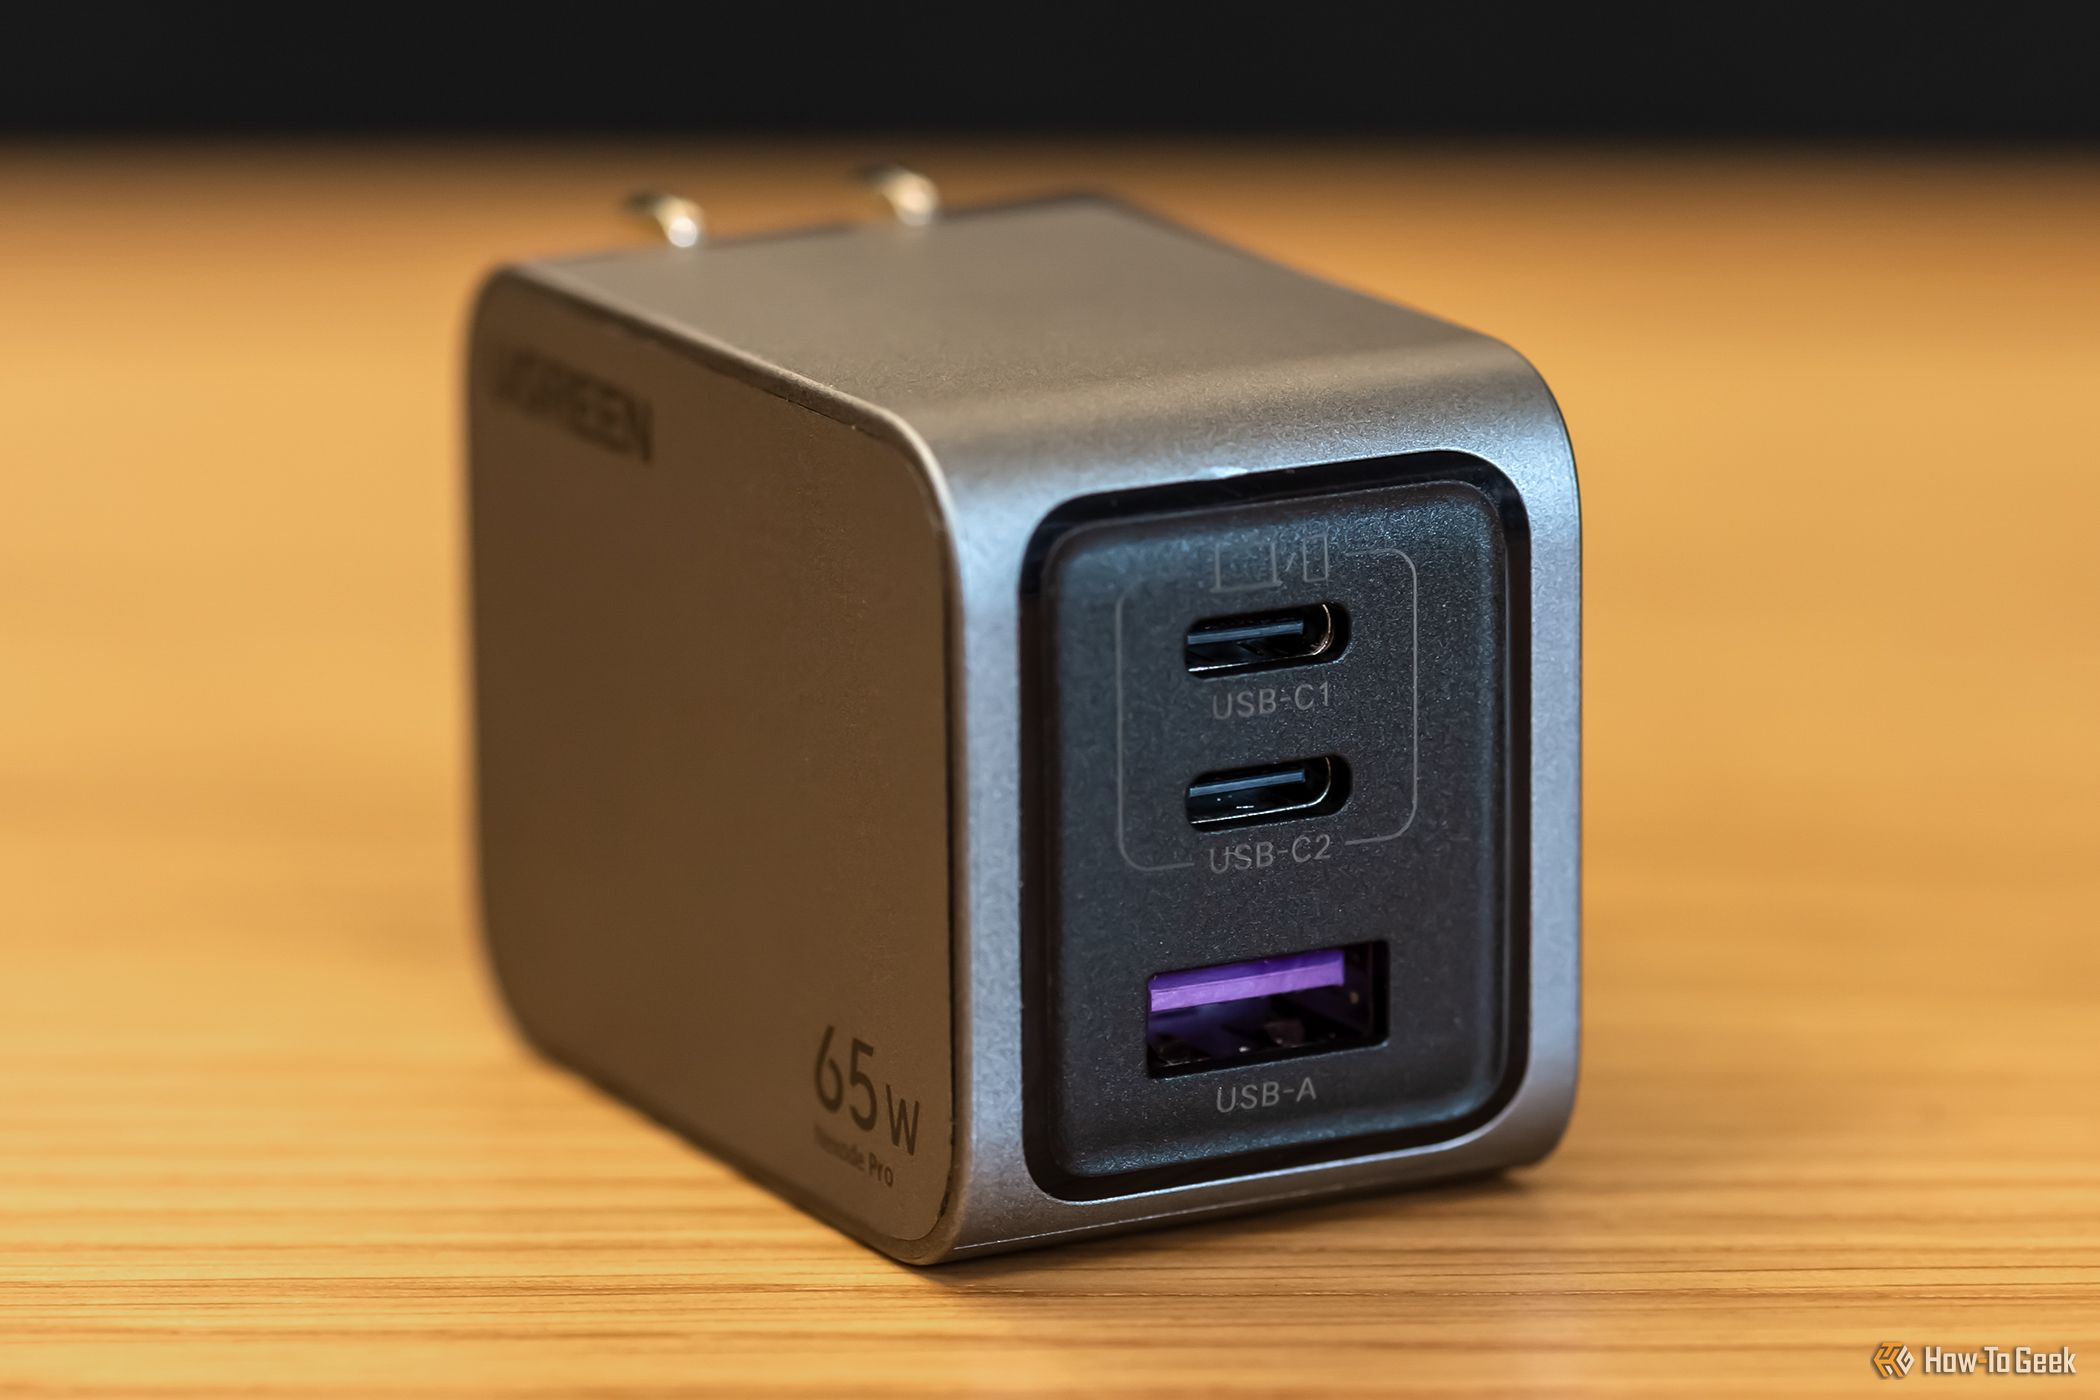 Ports on the Ugreen Nexode Pro 65W USB-C Wall Charger